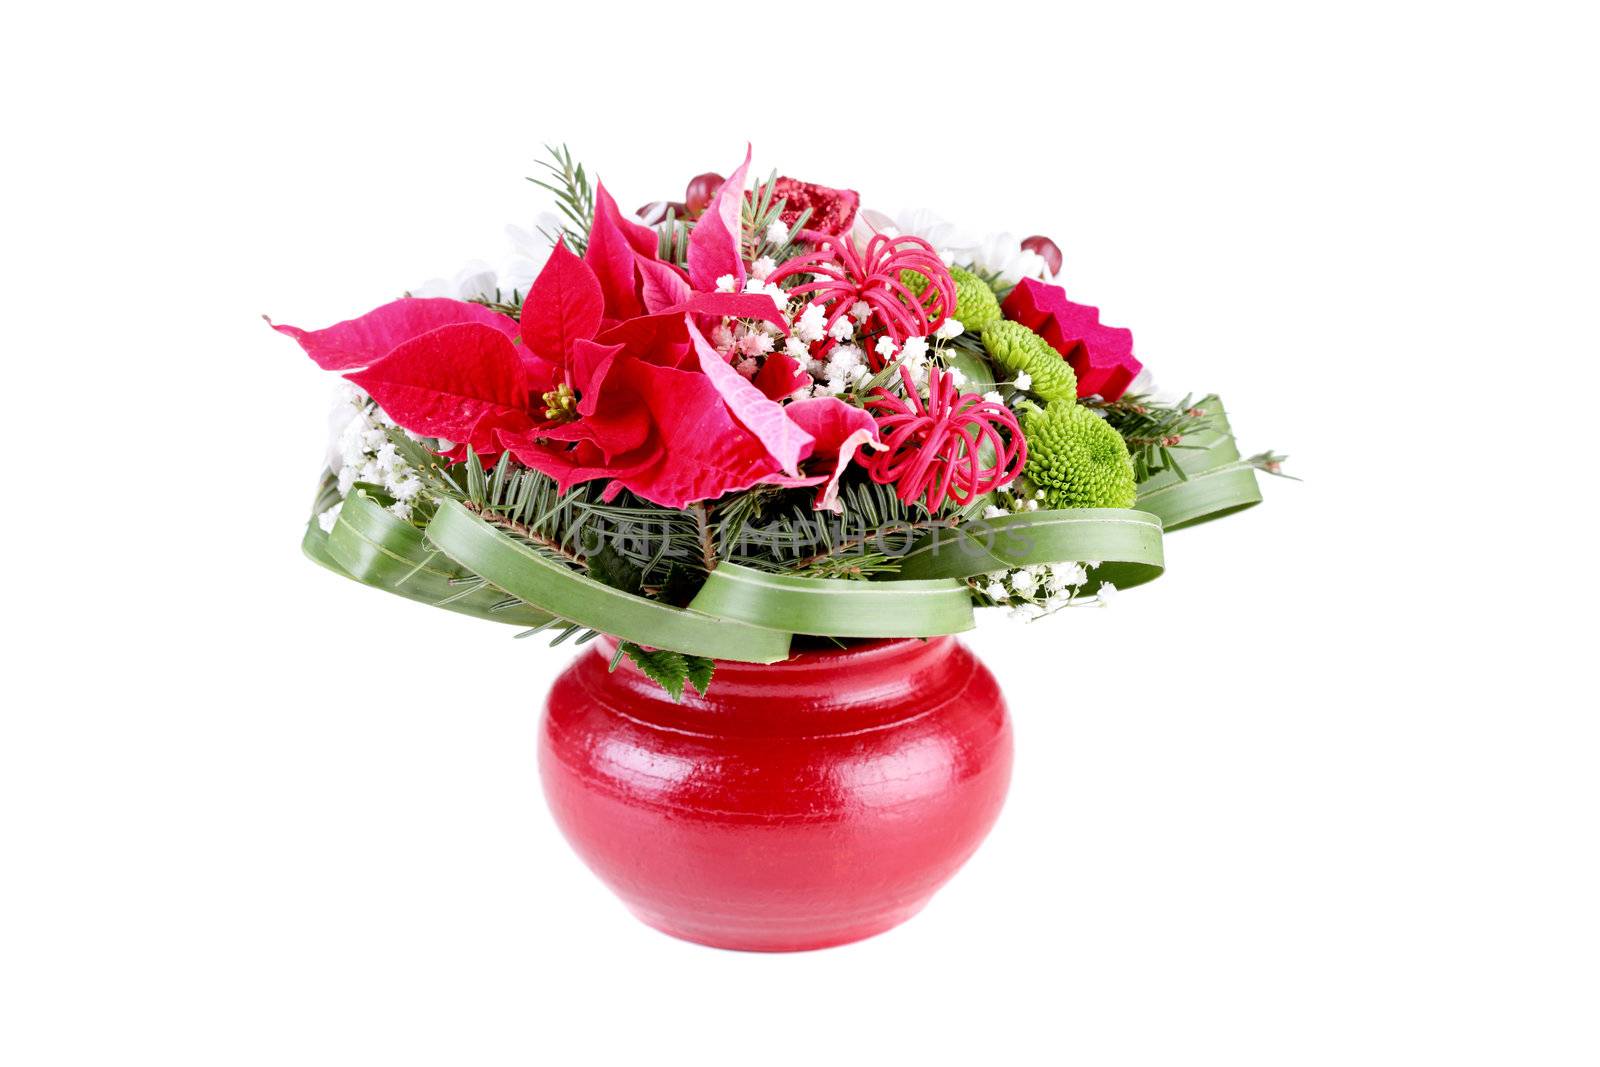 flower decoration in a red vase by kokimk